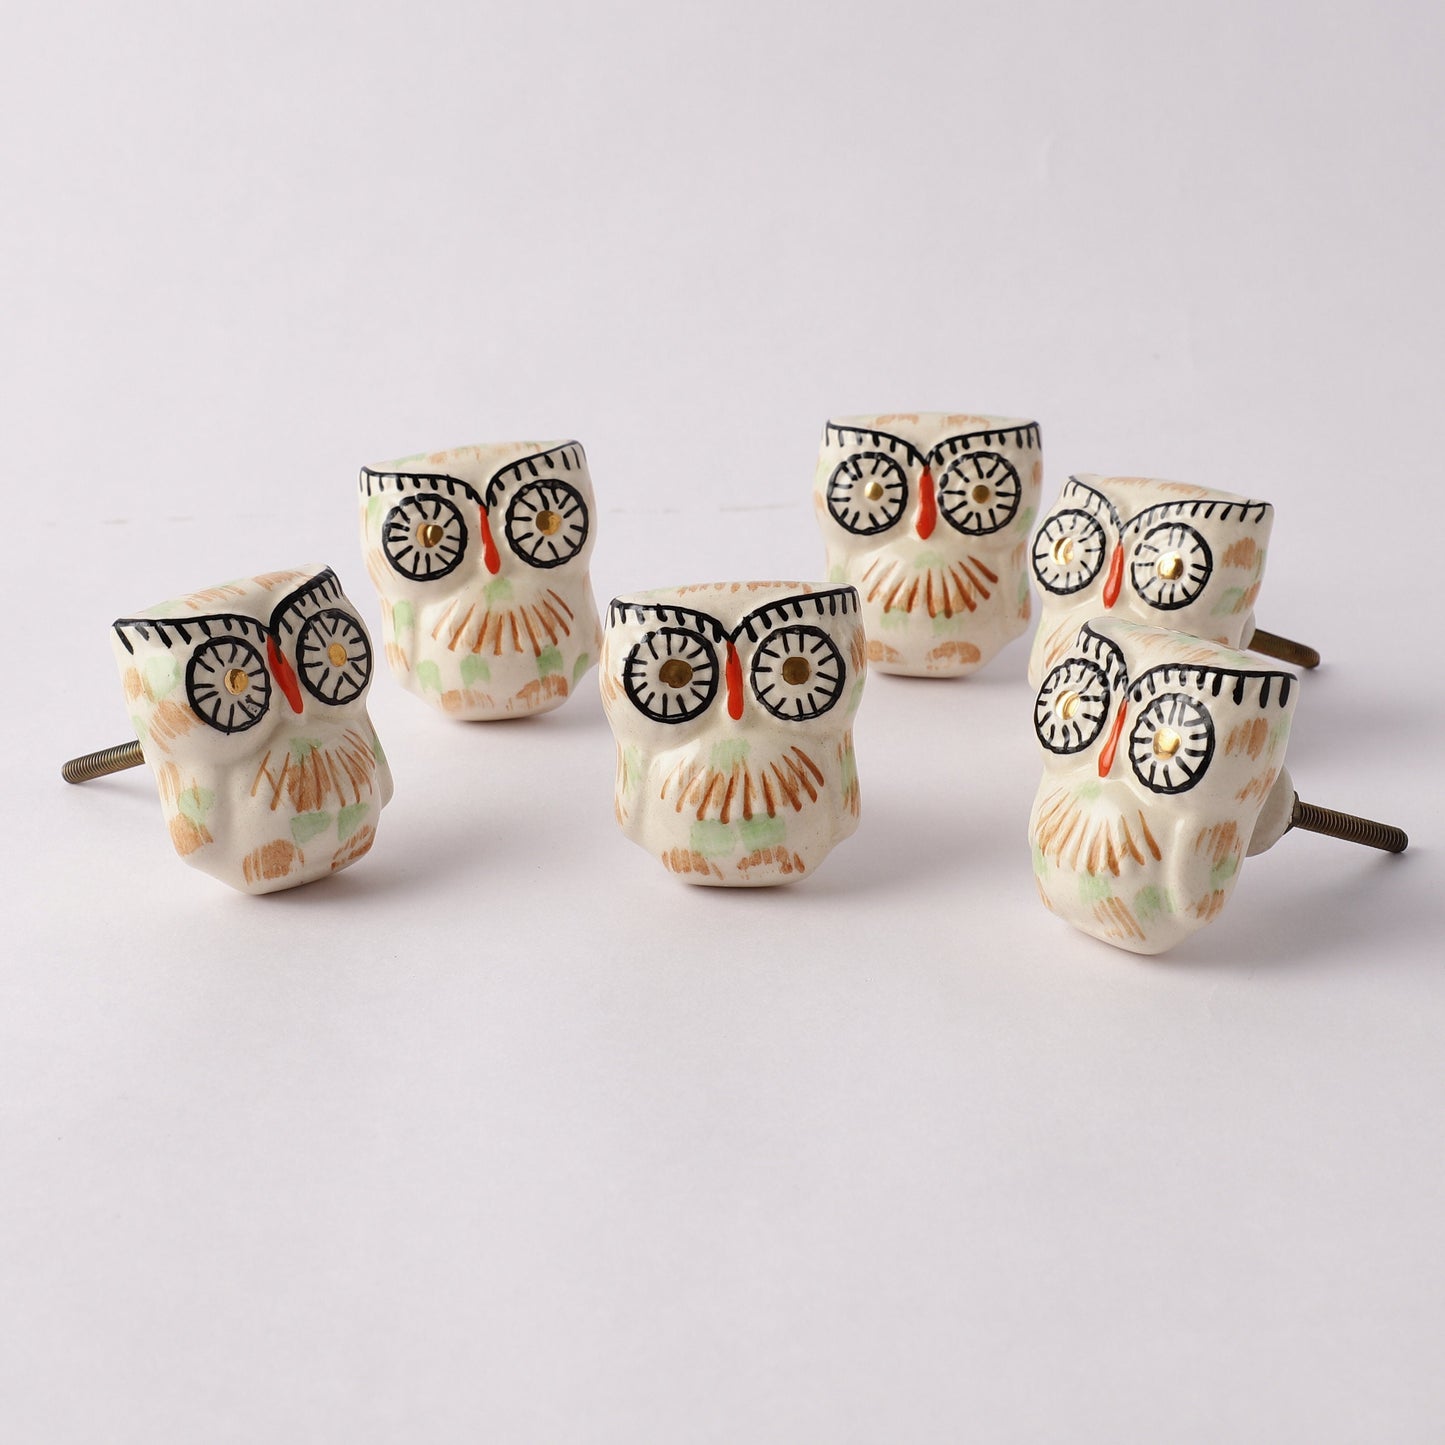 Hand Finished Owl Style Ceramic Pull Knobs (C11)